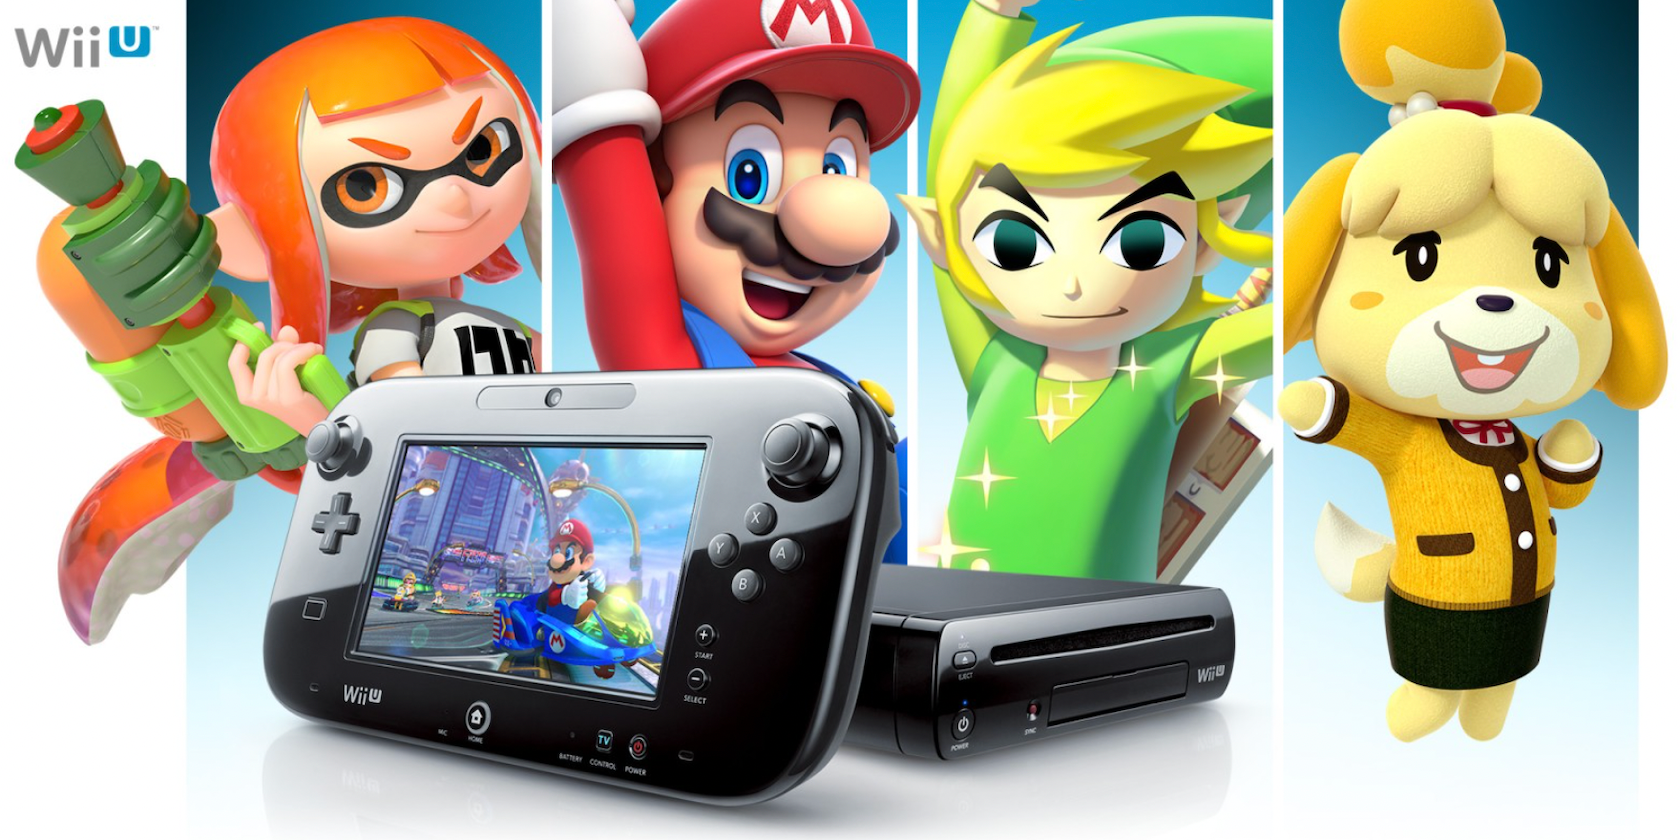 Thank Nintendo's failed Wii U for the Switch's wild success